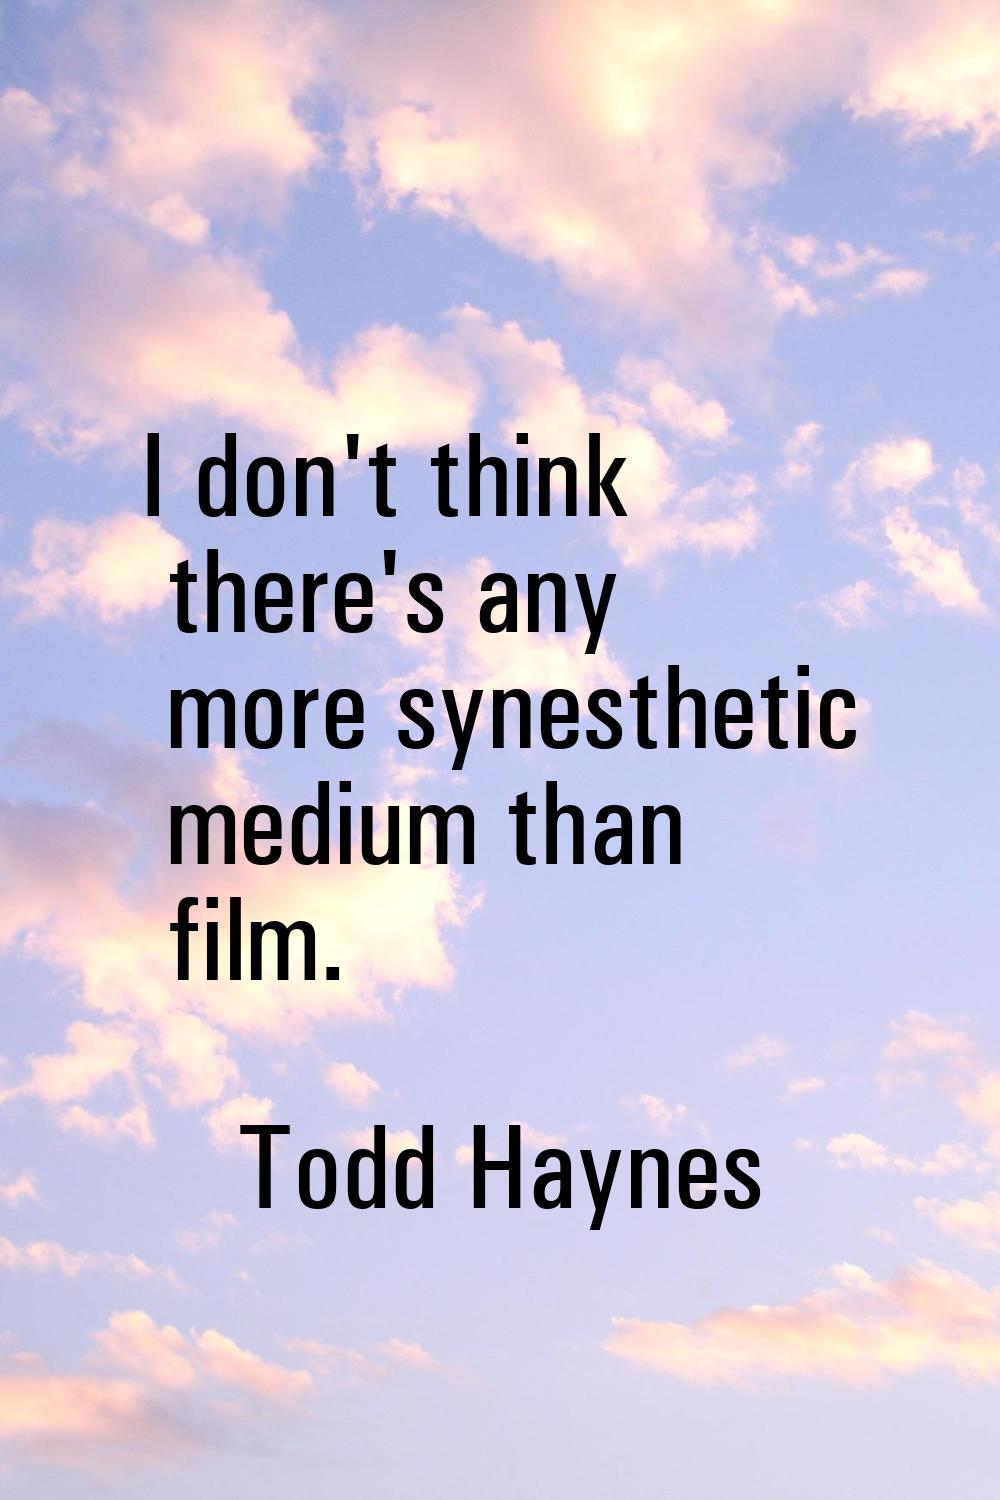 I don't think there's any more synesthetic medium than film.